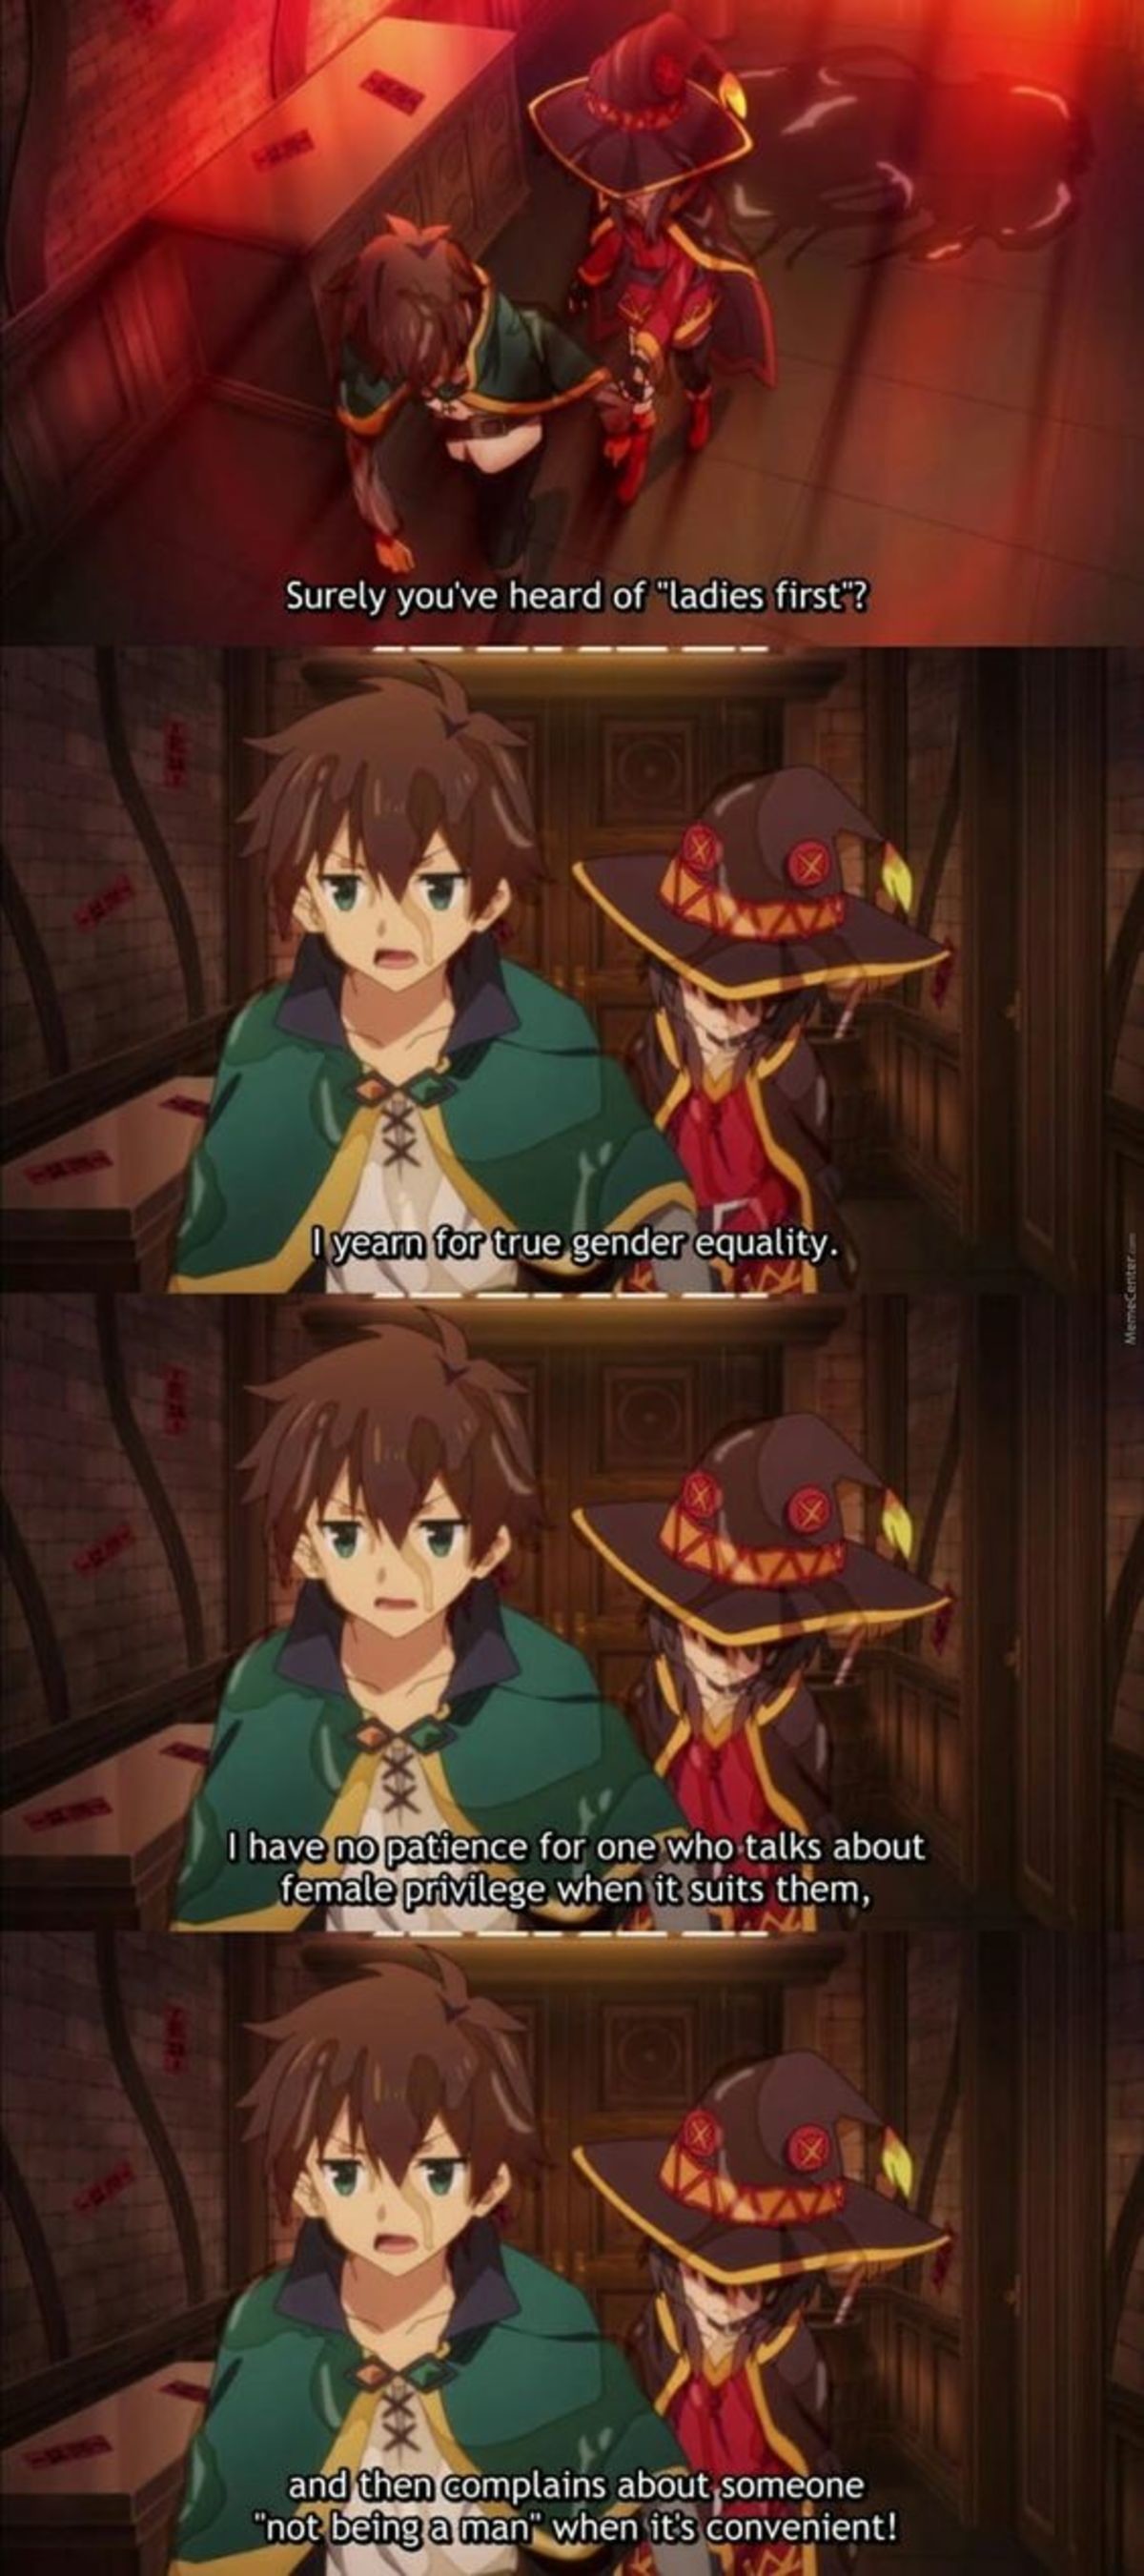 Kazuma being a pervert would actually be a good twist in that kind of movie  : r/Konosuba